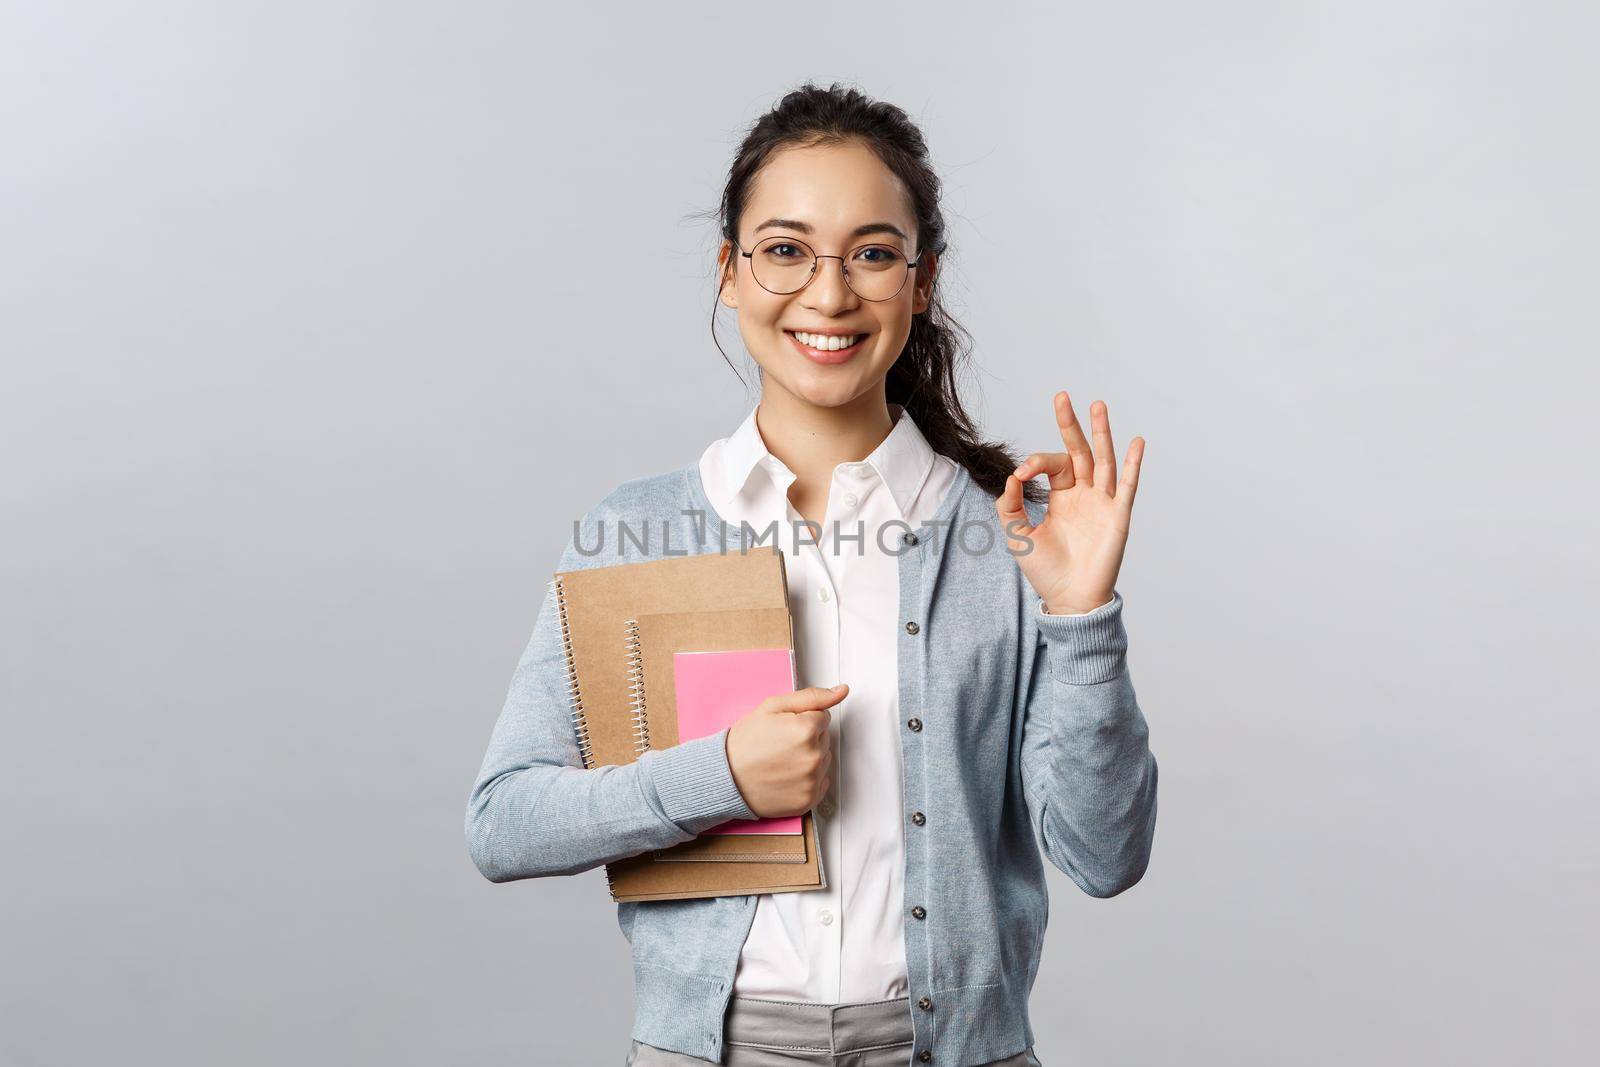 Education, teachers, university and schools concept. Excellent school, join our online lesson. Portrait of satisfied young female student in glasses, show okay sign and hold notebooks with homework.